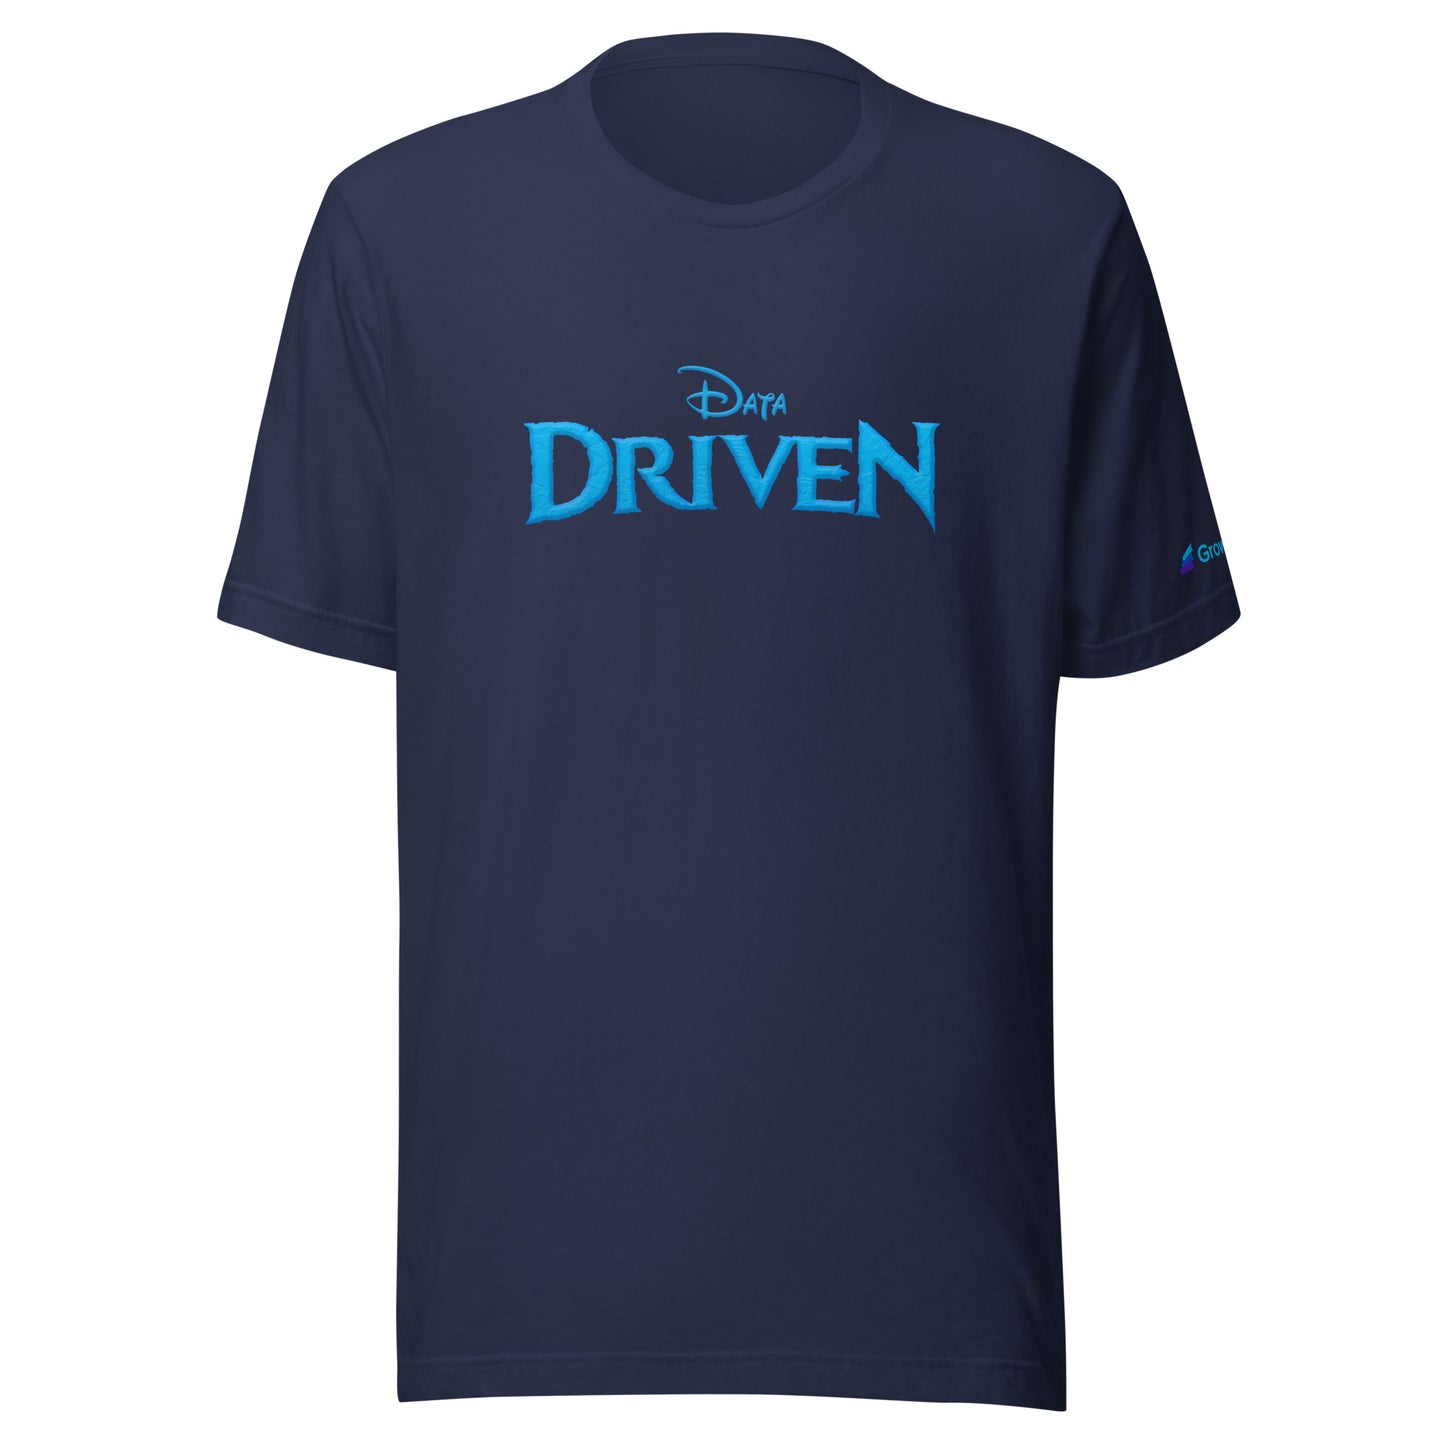 Icy Data Driven T-shirt